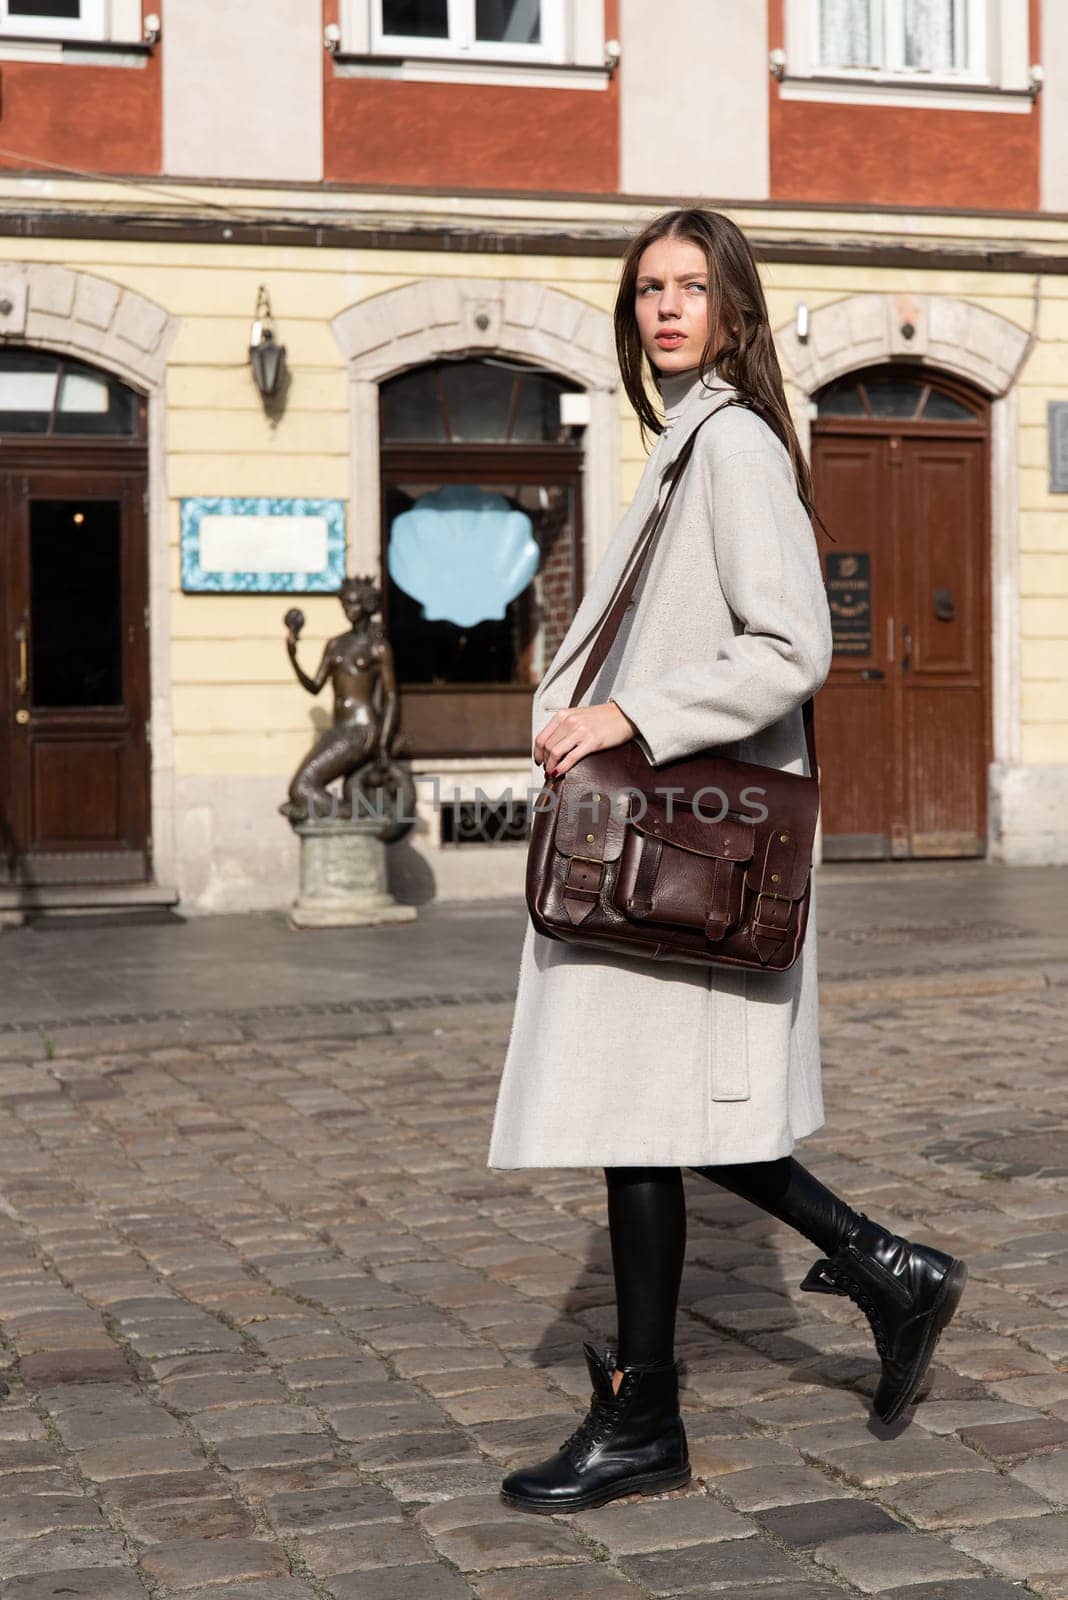 photo of a woman with a brown leather briefcase with antique and retro look. Outdoors photo by Ashtray25